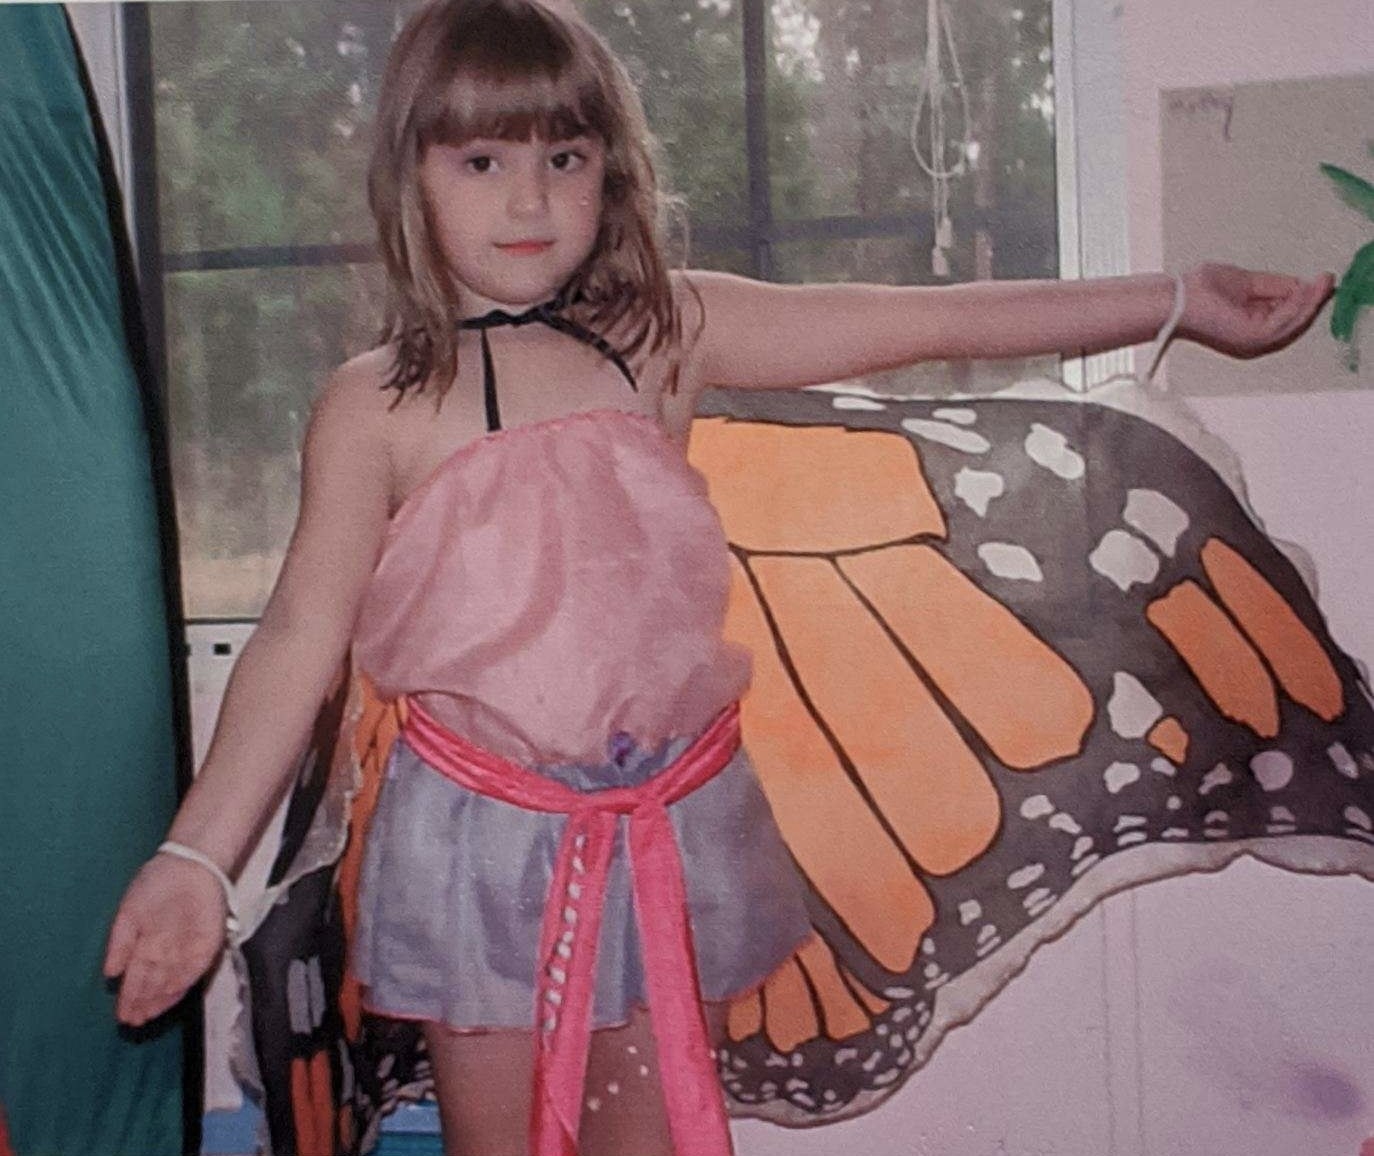 The author as a child wearing butterfly wings